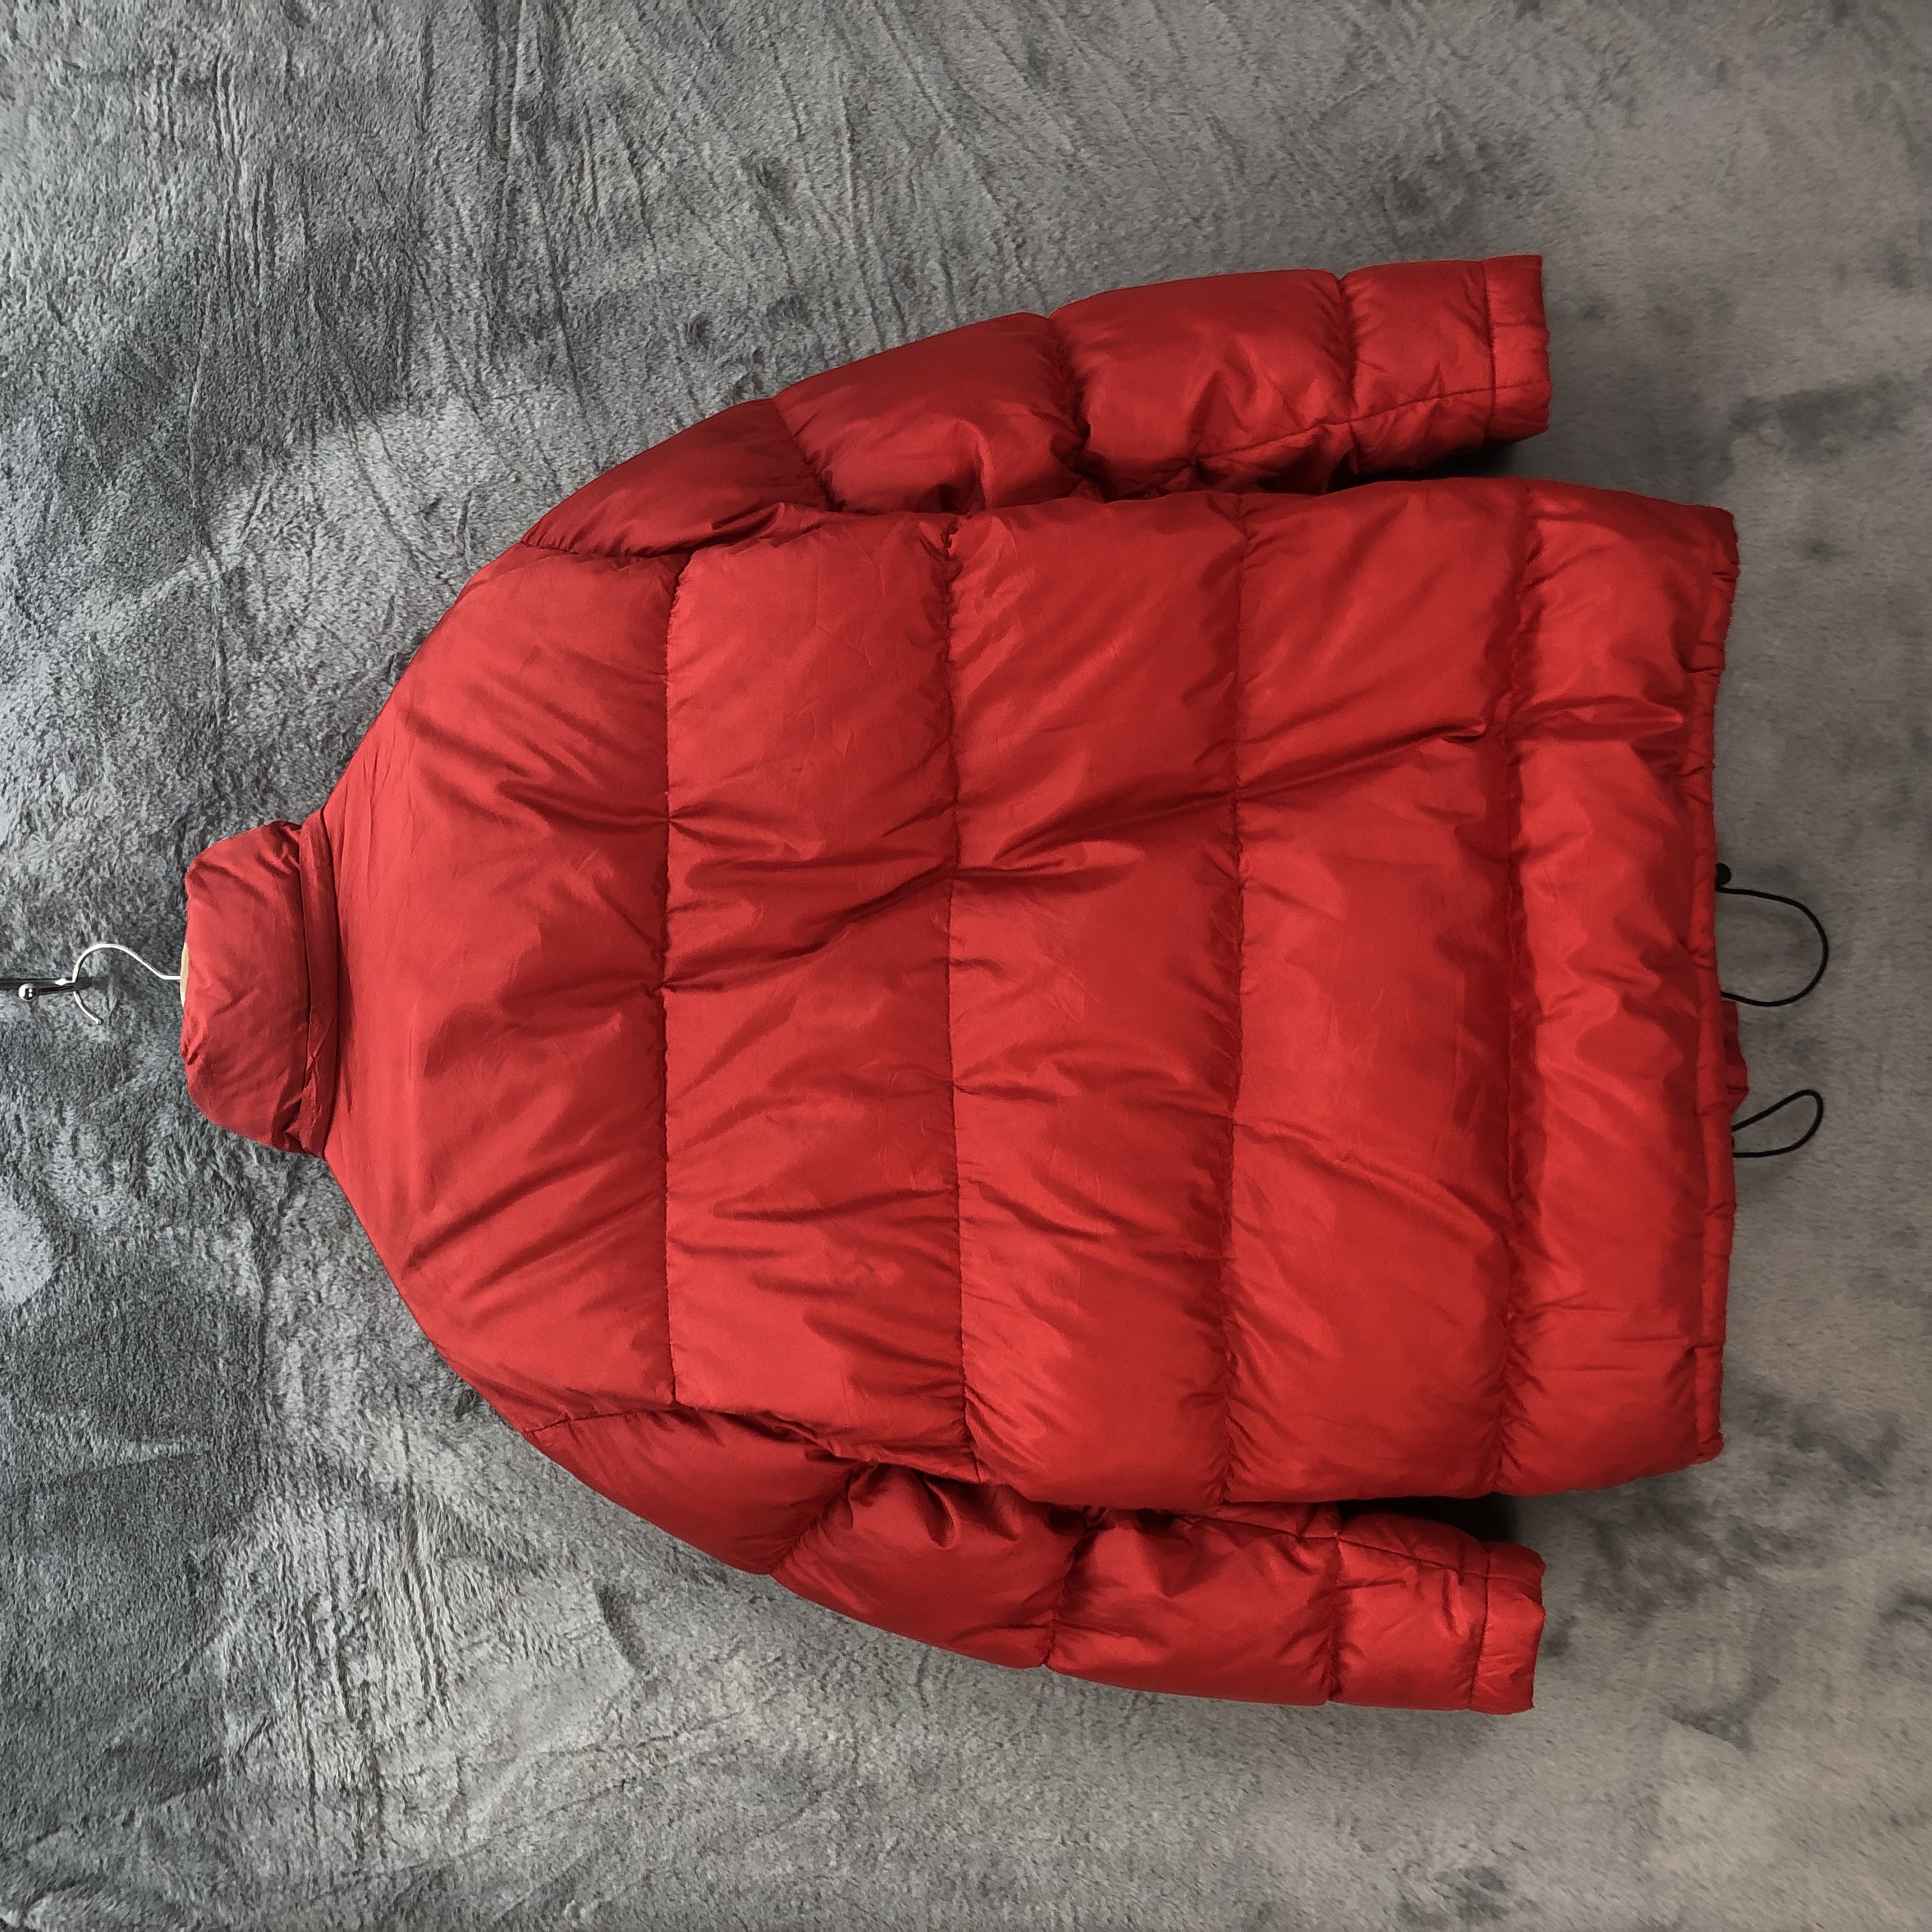 NIGEL CABOURN RED DOWN PUFFER JACKET #6553-73 - 18